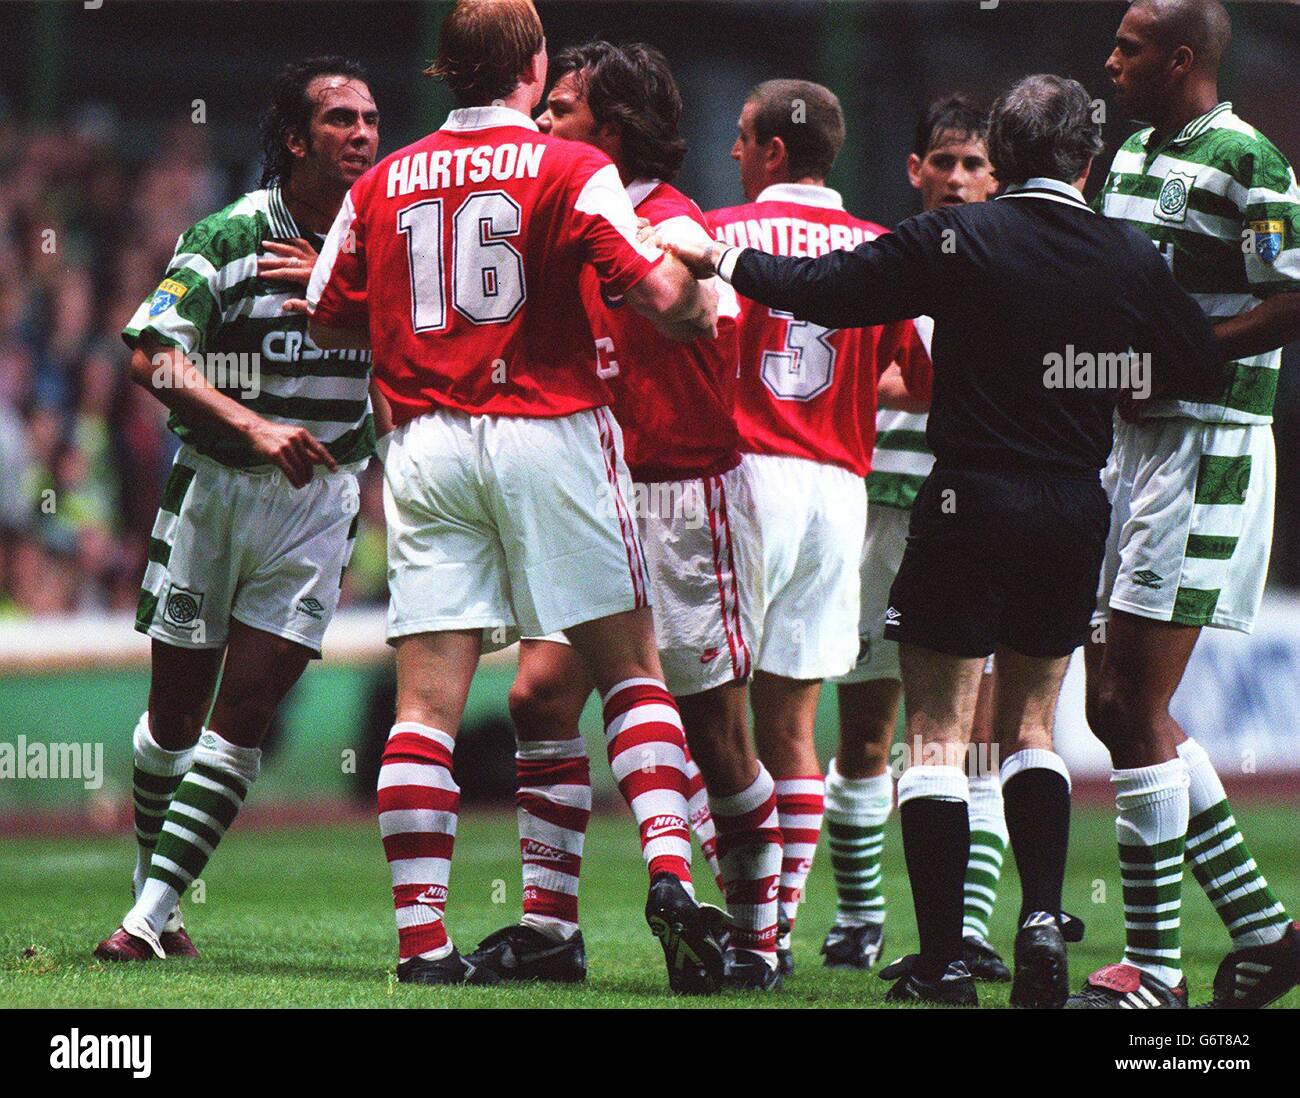 Referee Mr R T Tait tries to break up a fracas during the match involving (l-r) Paolo Di Canio (Celtic), John Hartson, David Hillier, Nigel Winterburn (Arsenal), Jackie McNamara and Pierre Van Hooijdonk of Celtic. Stock Photo